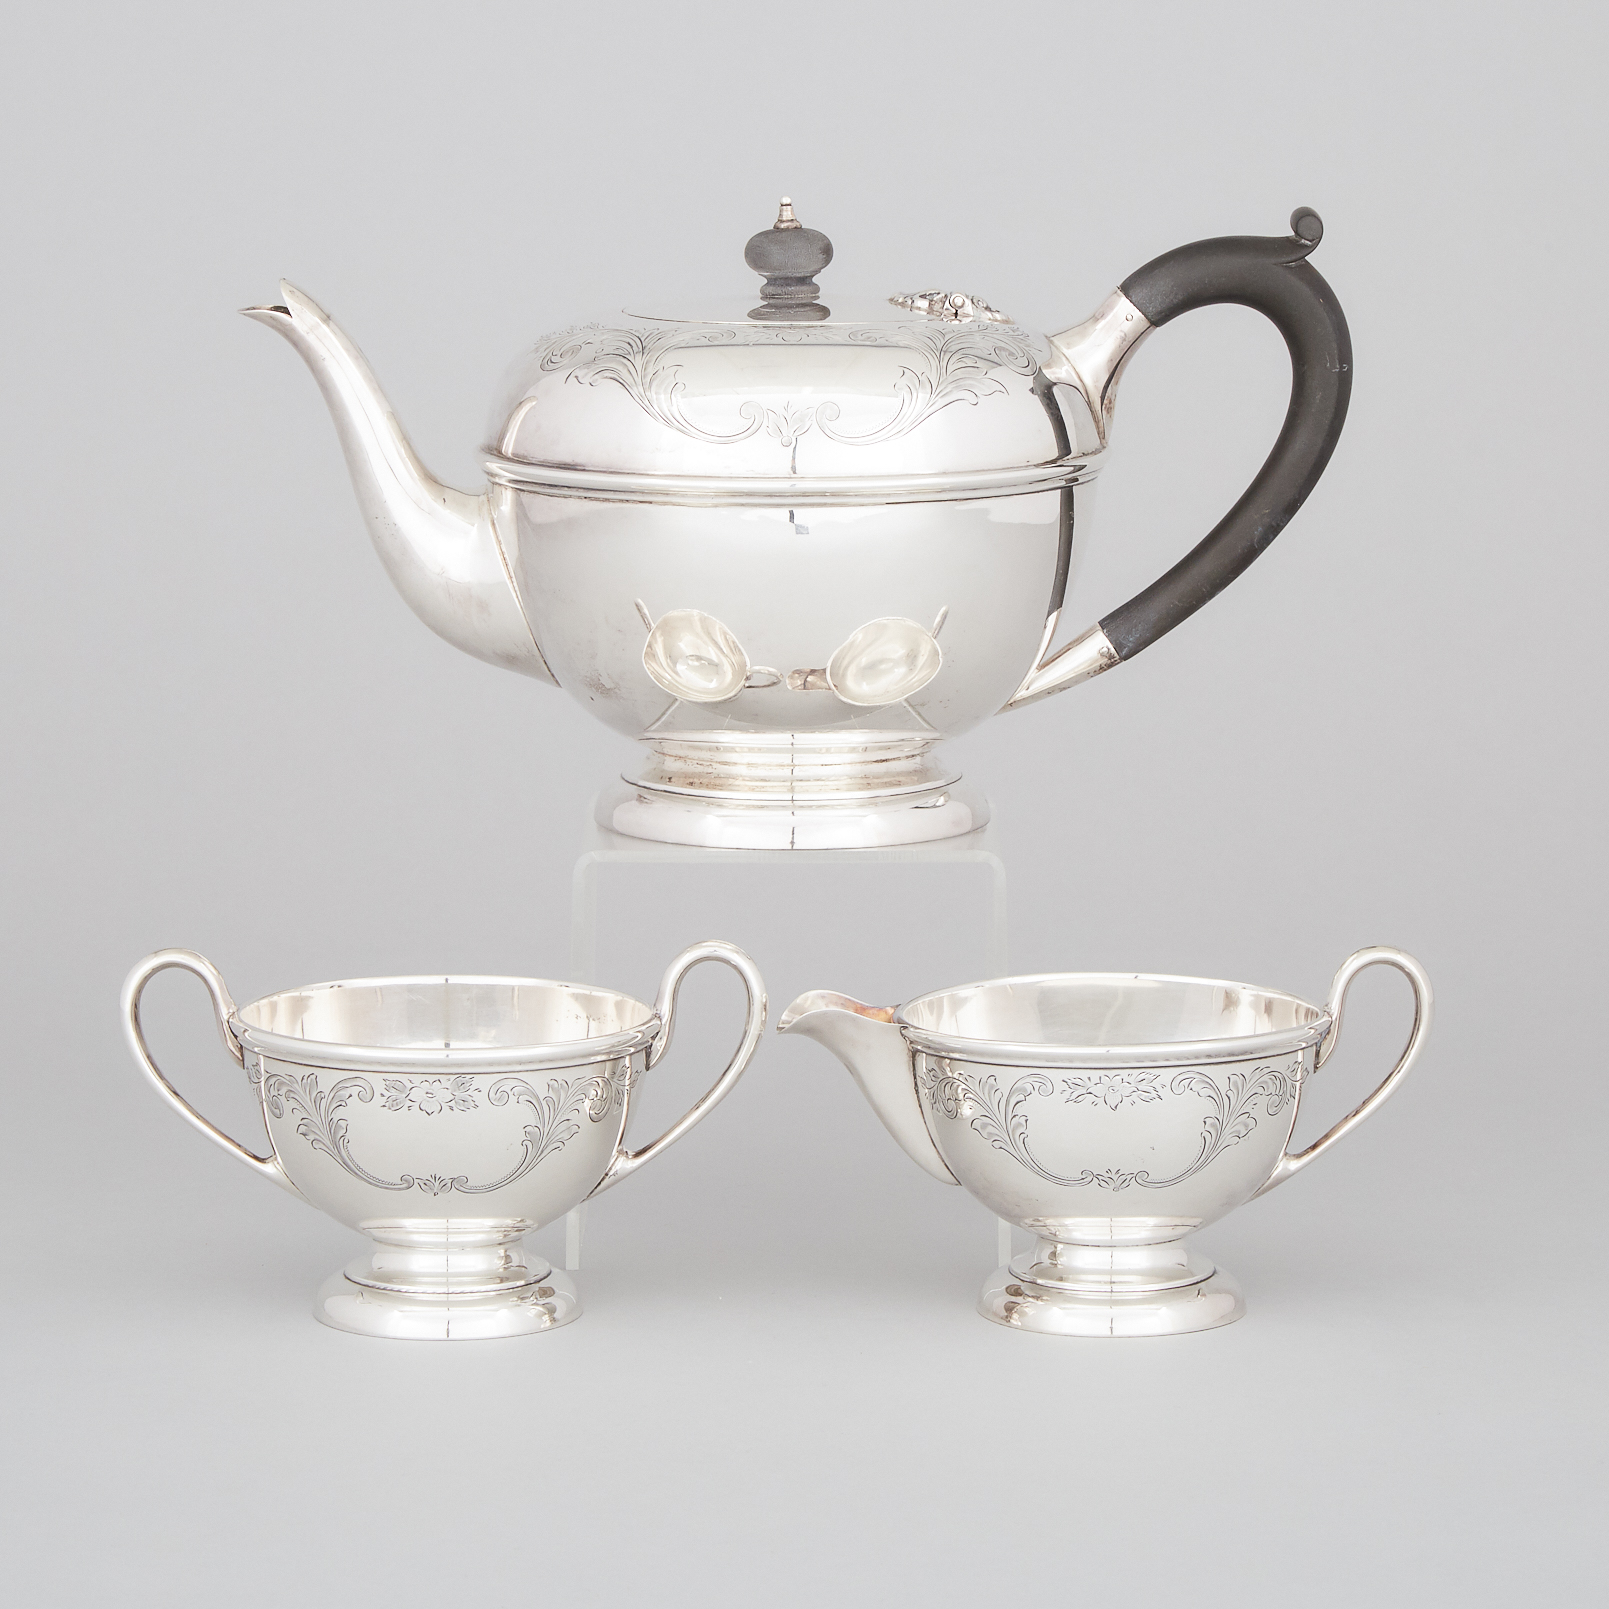 Canadian Silver Tea Service, Henry Birks & Sons, Montreal, Que., 20th century